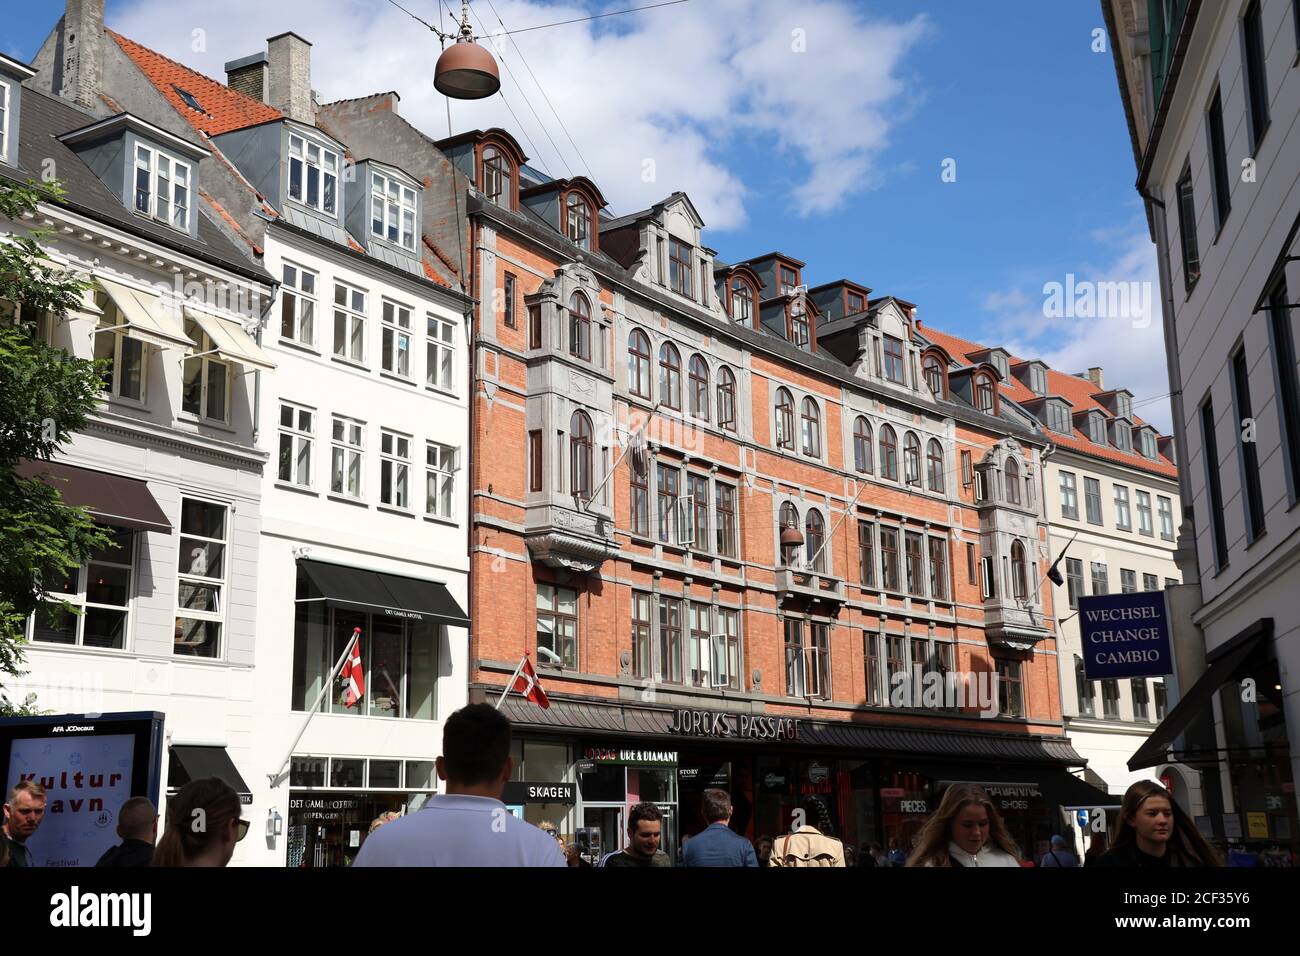 Copenhagen City Centre High Resolution Stock Photography and Images - Alamy